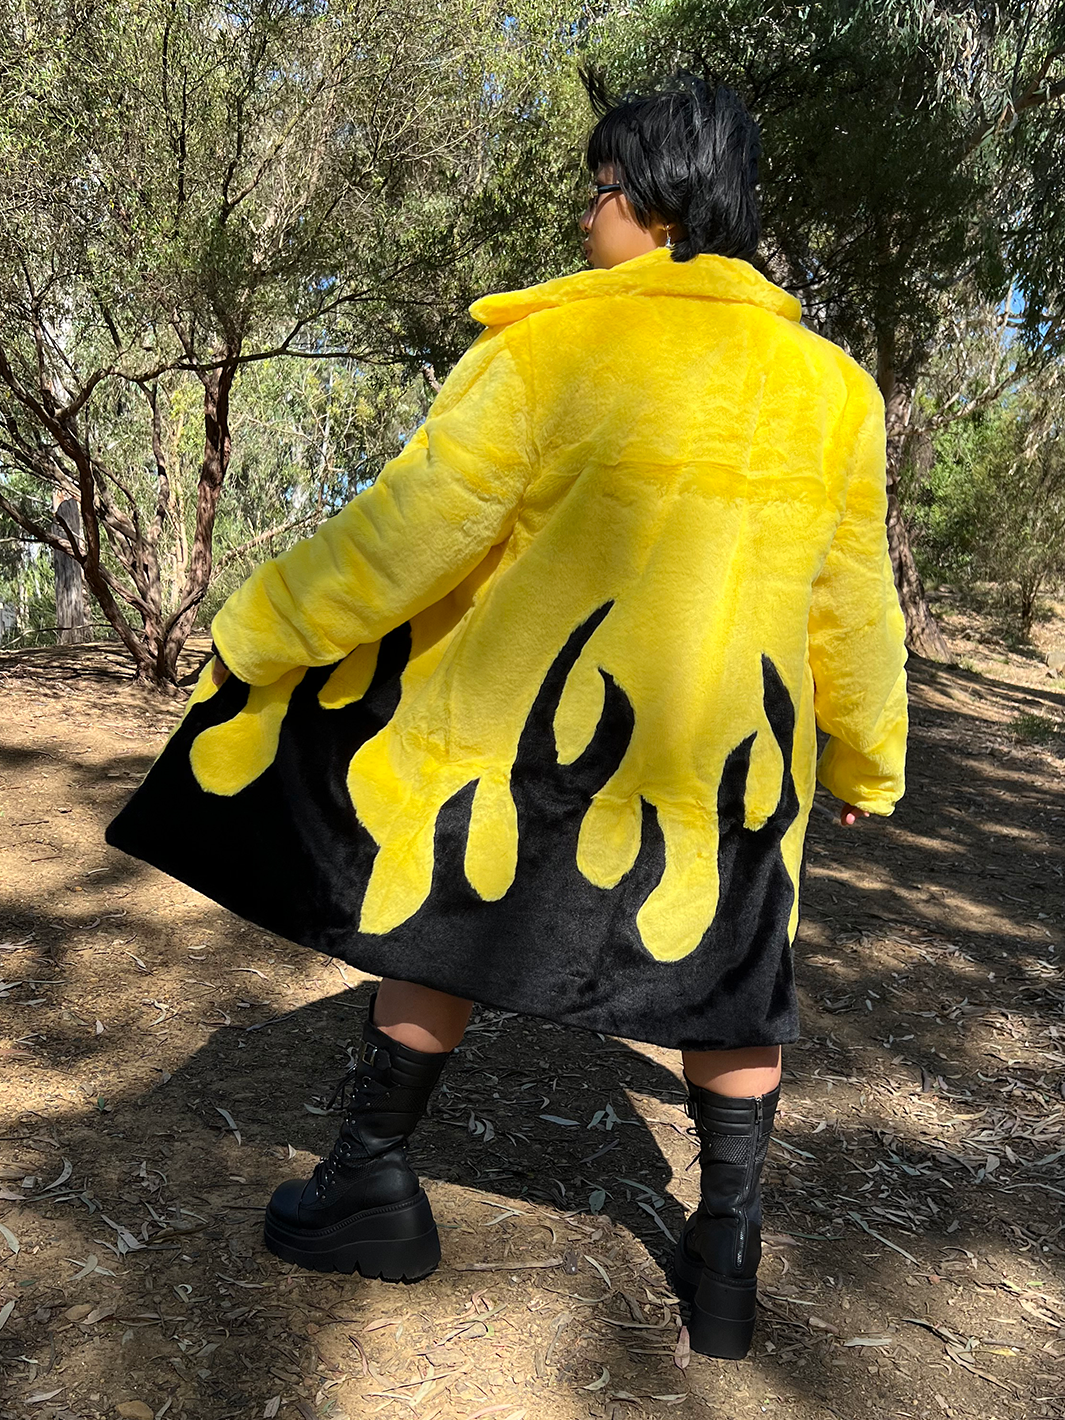 *COLLAB* PURE FIRE FAUX FUR JACKET - YELLOW/BLACK • READY TO SHIP •